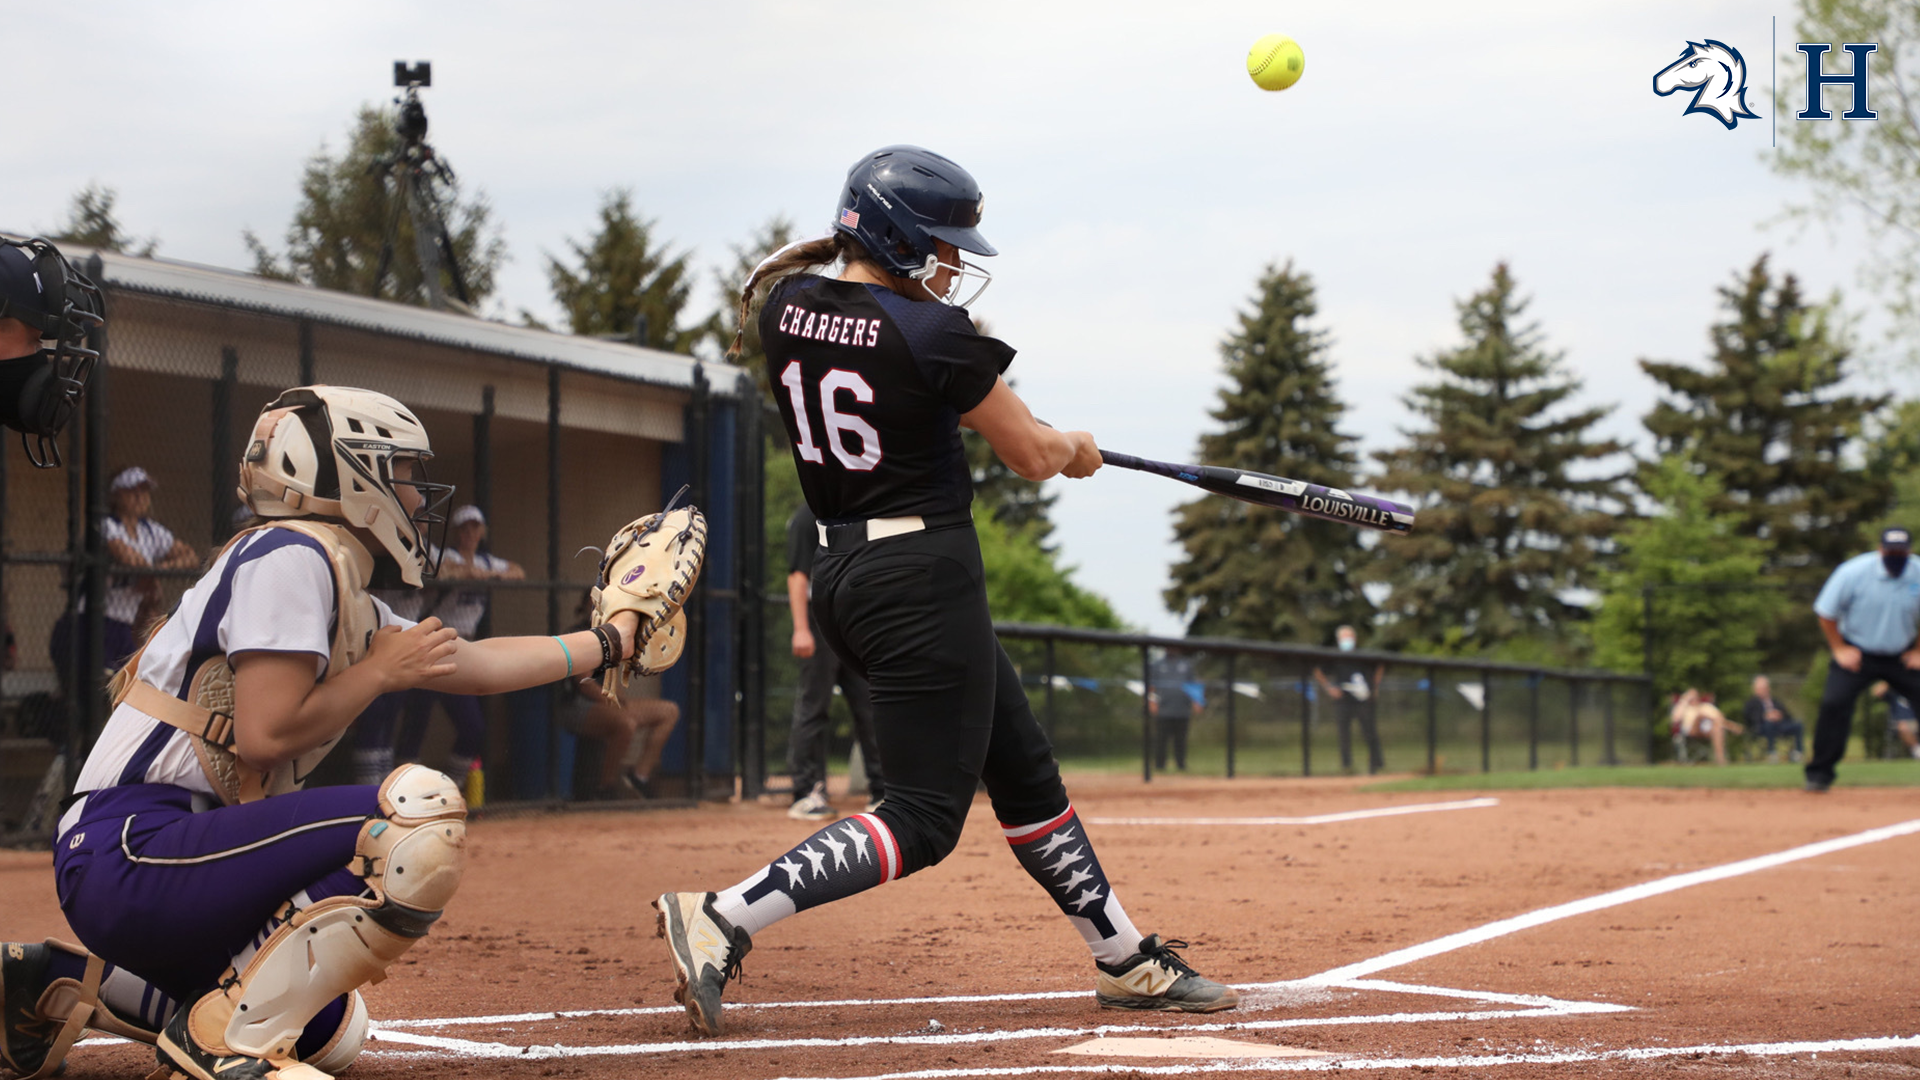 Chargers top Northwood 3-1, stay alive in NCAA softball tourney after morning loss